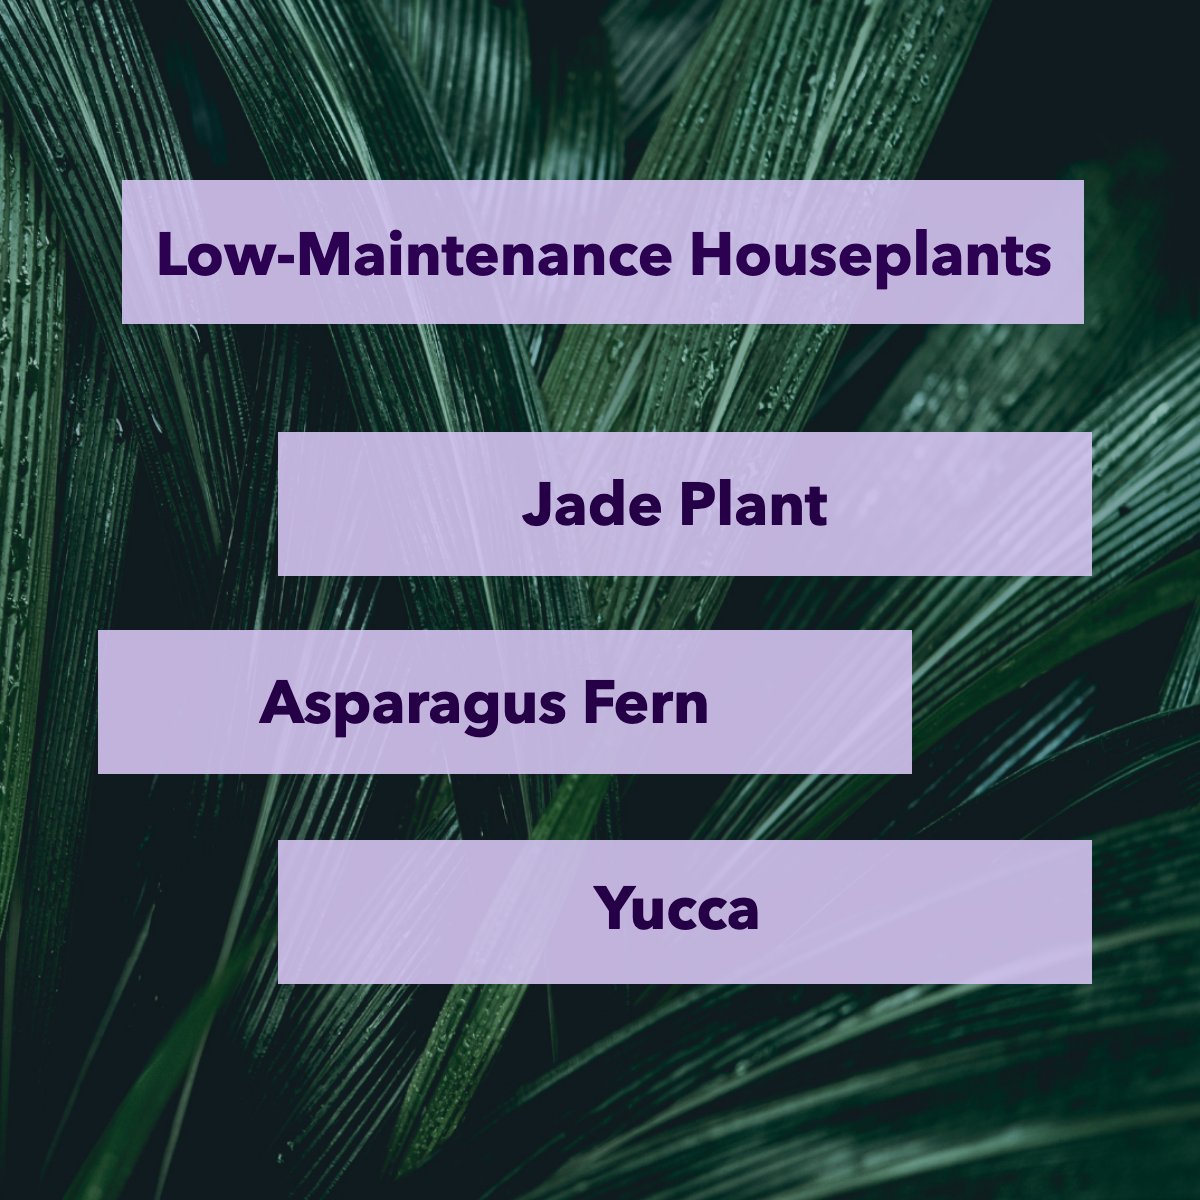 Need more green in your life? 🌳

We're talking houseplants 🌷. These low key indoor plants will give you all of the benefits for a fraction of the work: 

Jade Plant
Asparagus Fern
Yucca

#plant #plants #houseplants #indoorplants #plantcare #decor